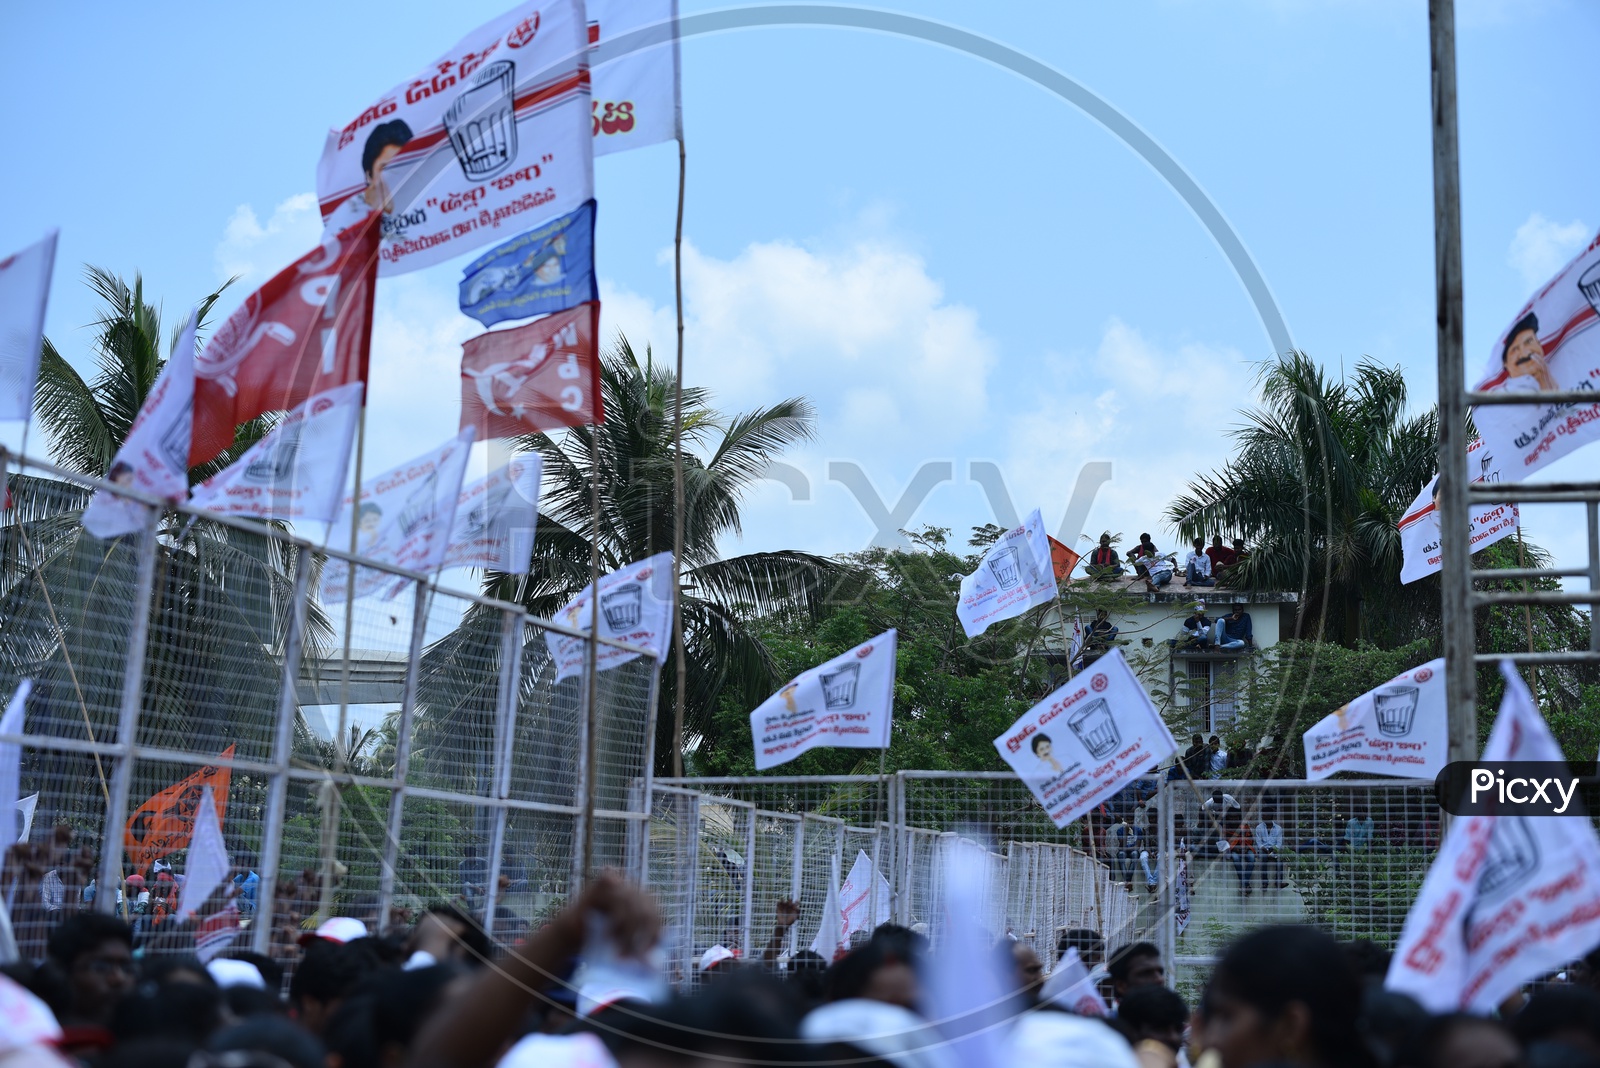 CPI, CPM, BSP and Jana sena  party flags at an election campaign in Amalapuram